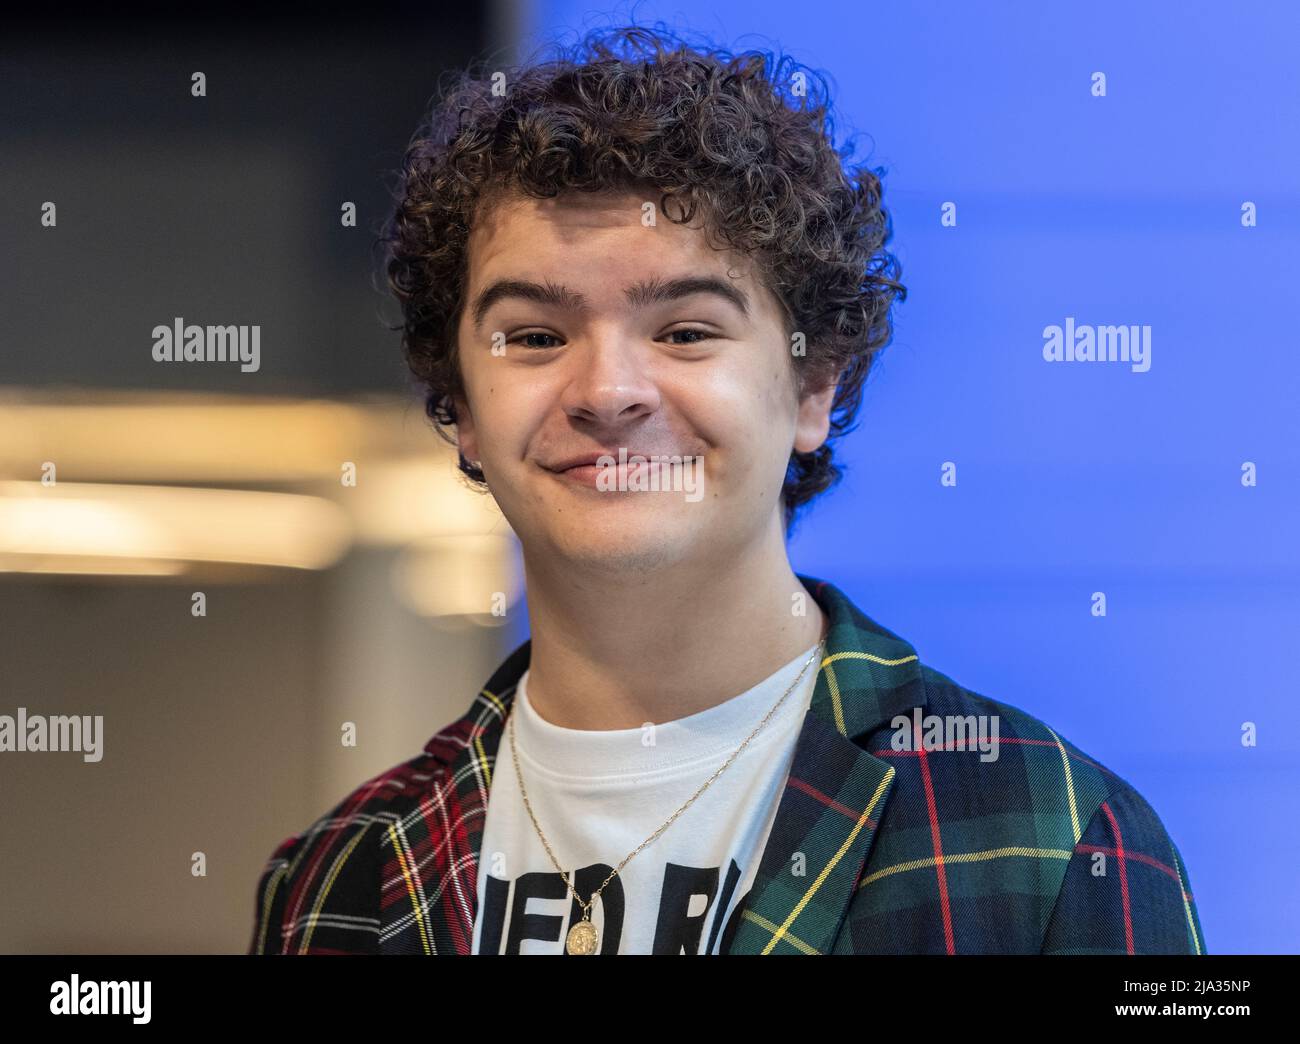 New York, NY - May 26, 2022: Gaten Matarazzo from Stranger Things attends ceremonial lighting of Empire State Building ahead of global event for season 4 premiere Stock Photo